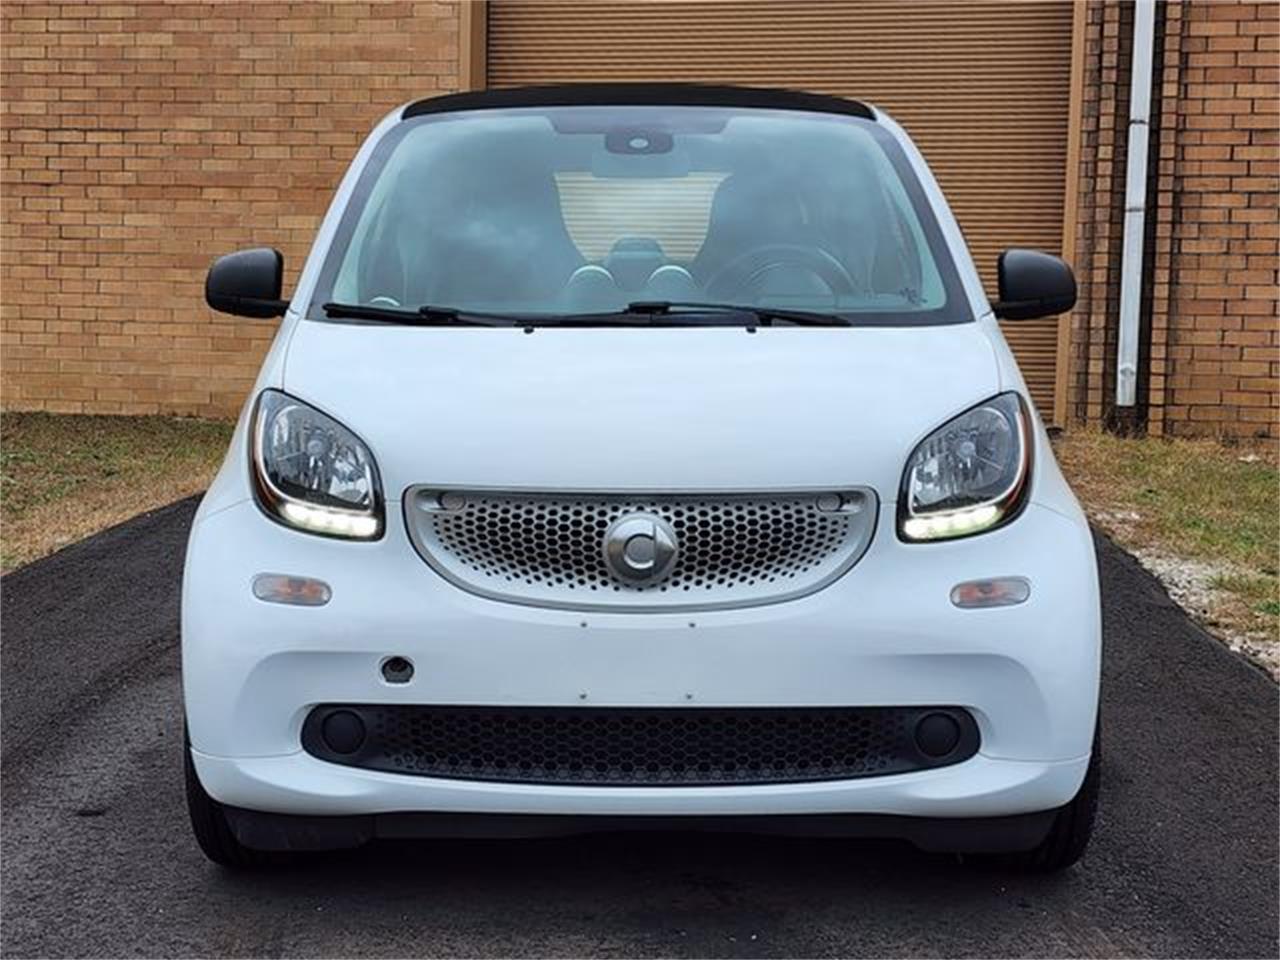 Pick of the Day: 2017 Smart Fortwo